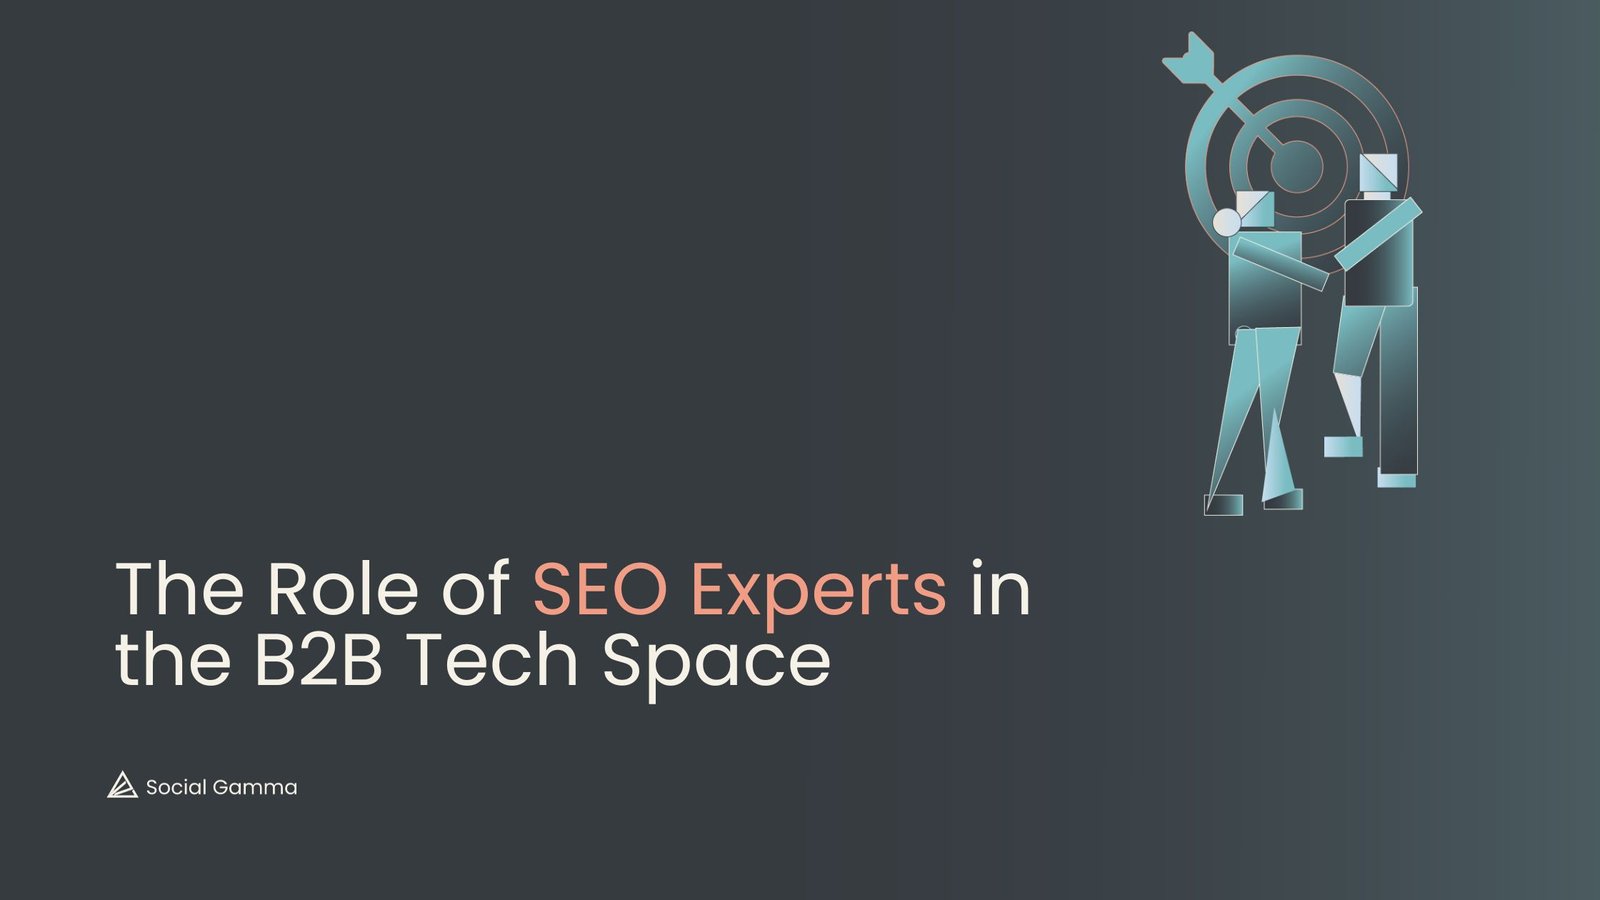 The Role of SEO Experts in the B2B Tech Space